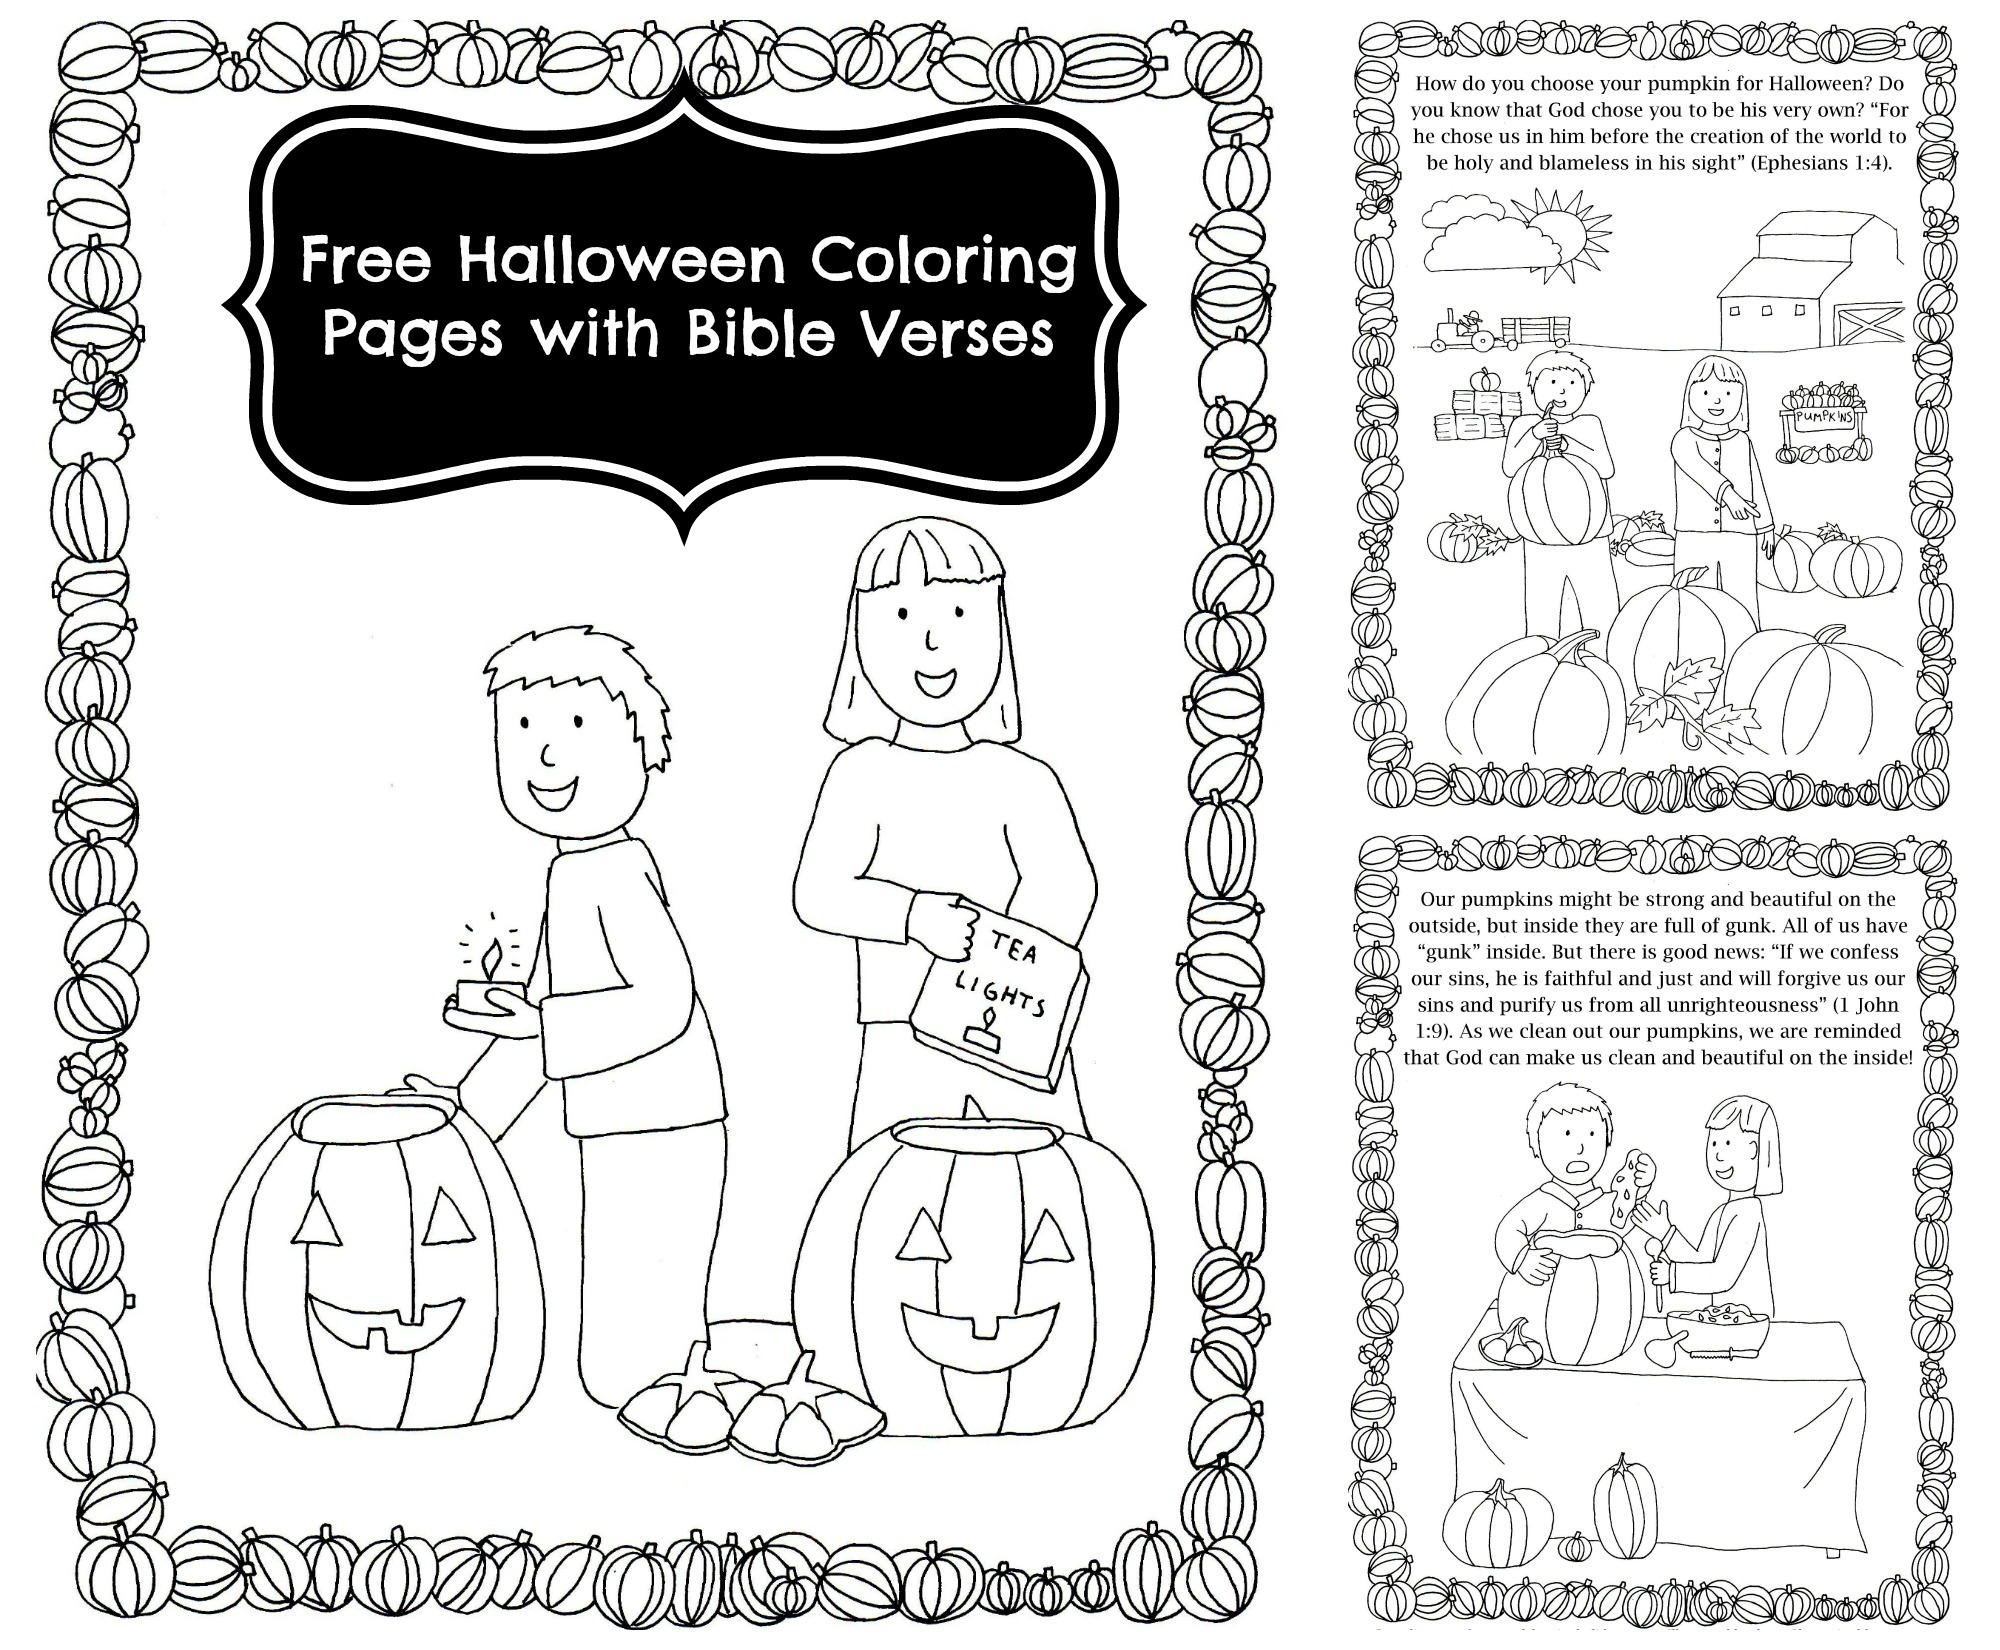 Halloween Coloring Pages with Bible Verses